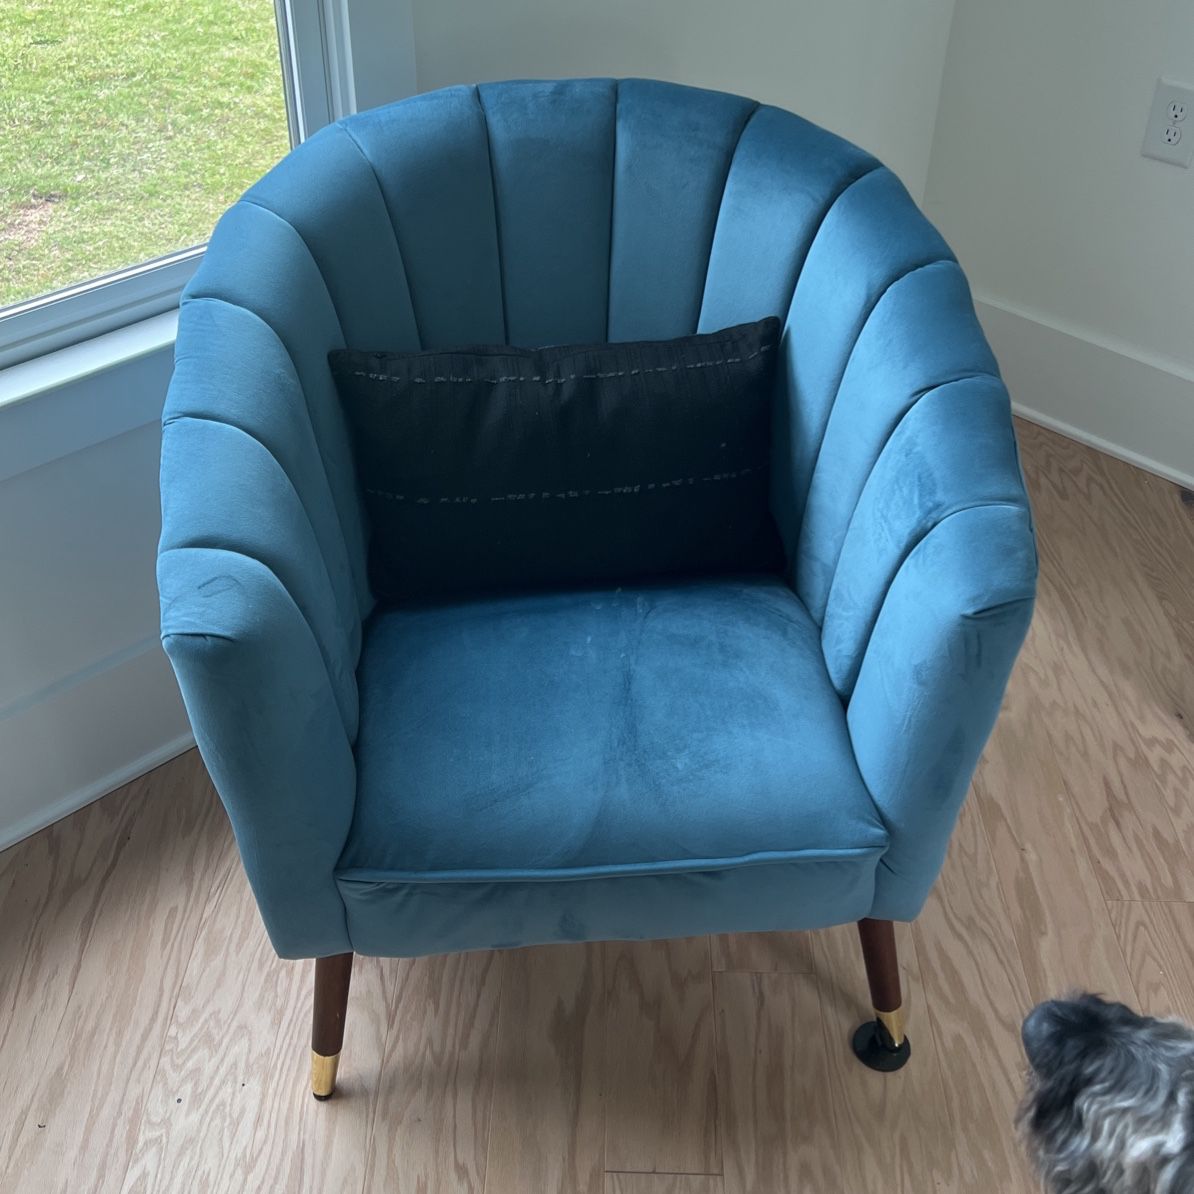 Two Blue Crushed Velvet Cushion Chairs 